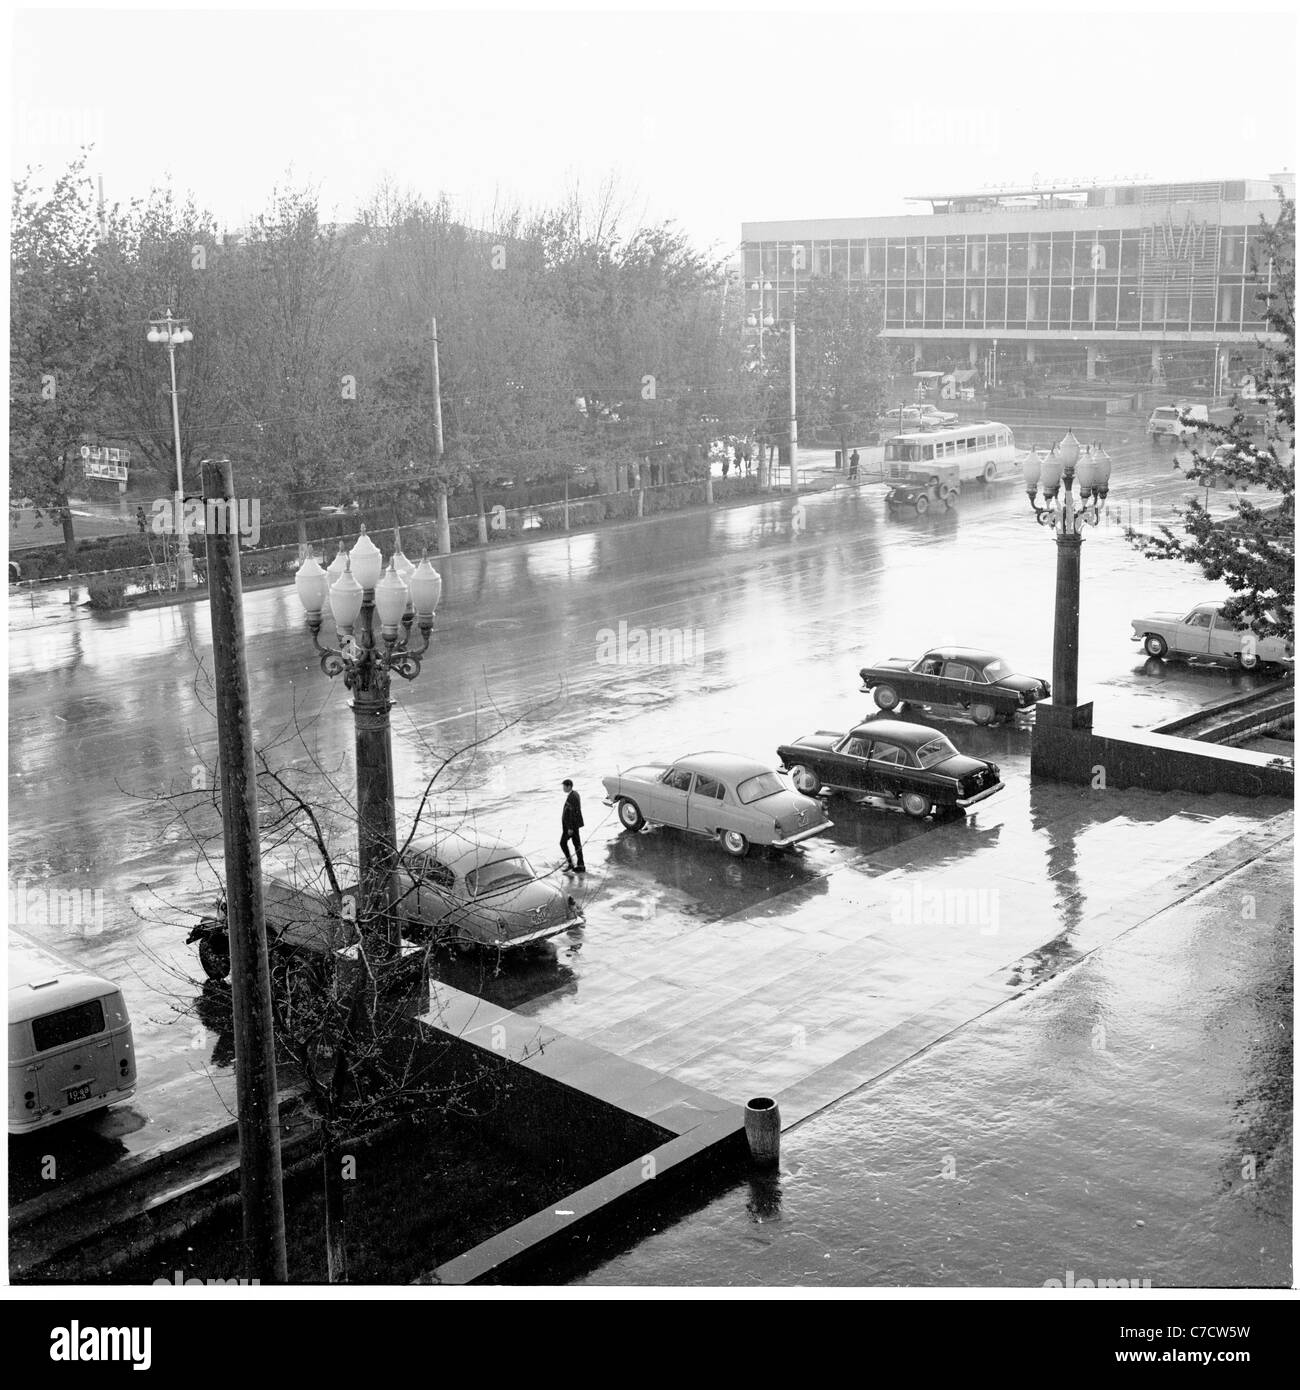 Historical picture from Russia, 1950s. Cars of the era parked outside a building on a wet evening in the former Soviet Union. Stock Photo